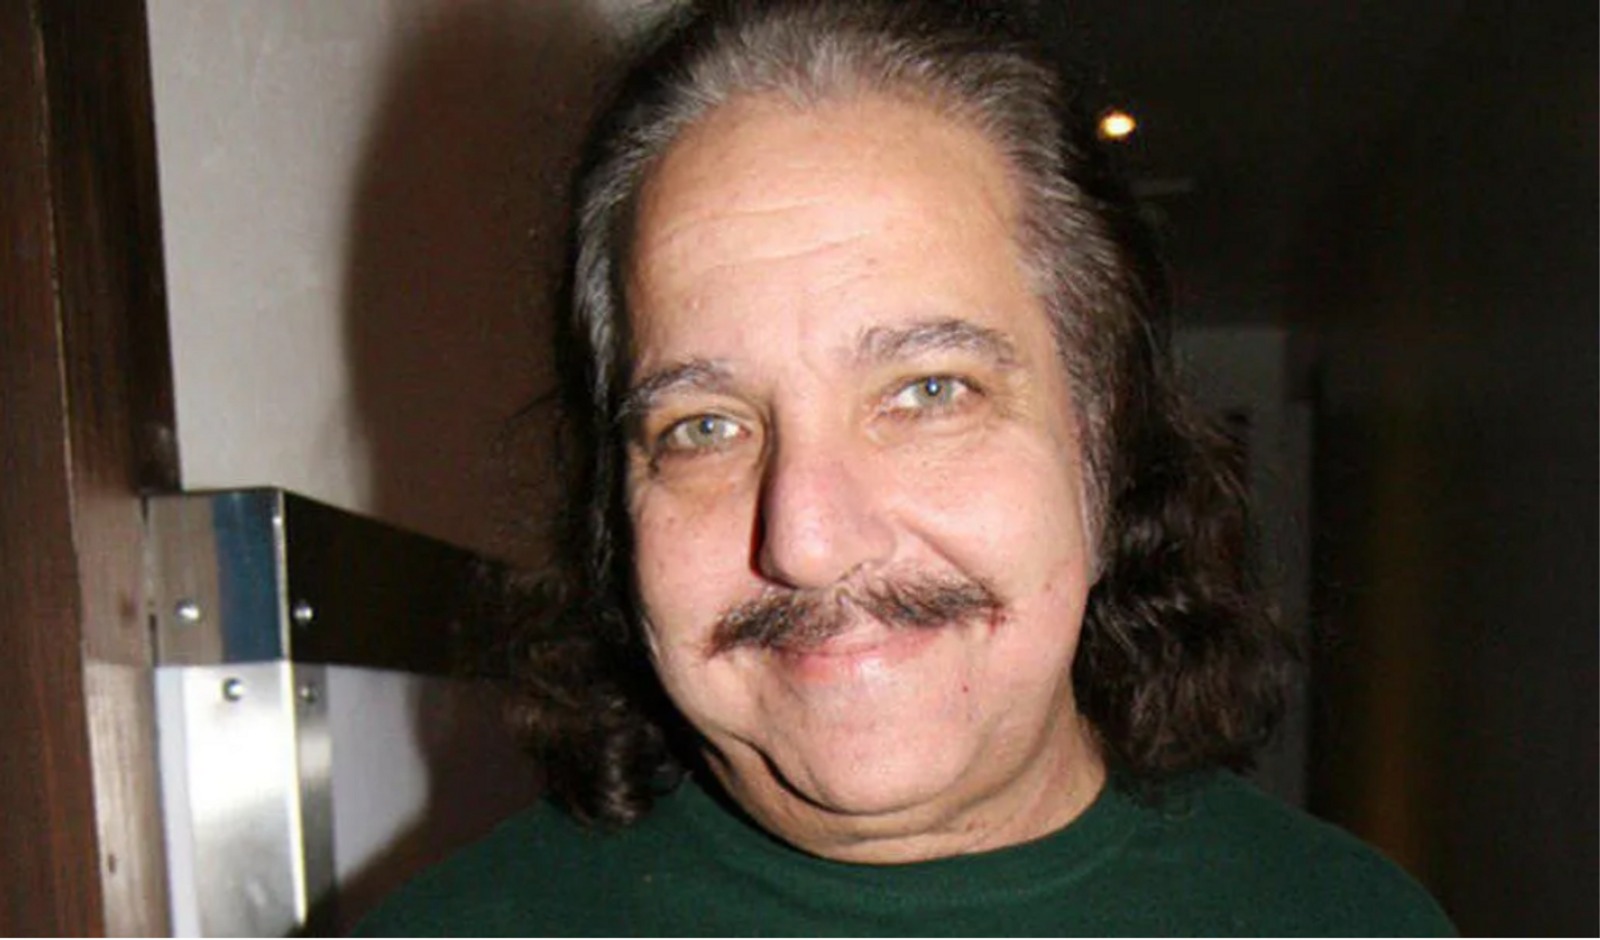 Ron Jeremy Hit With 20 New Charges; Next Due in Court October 29